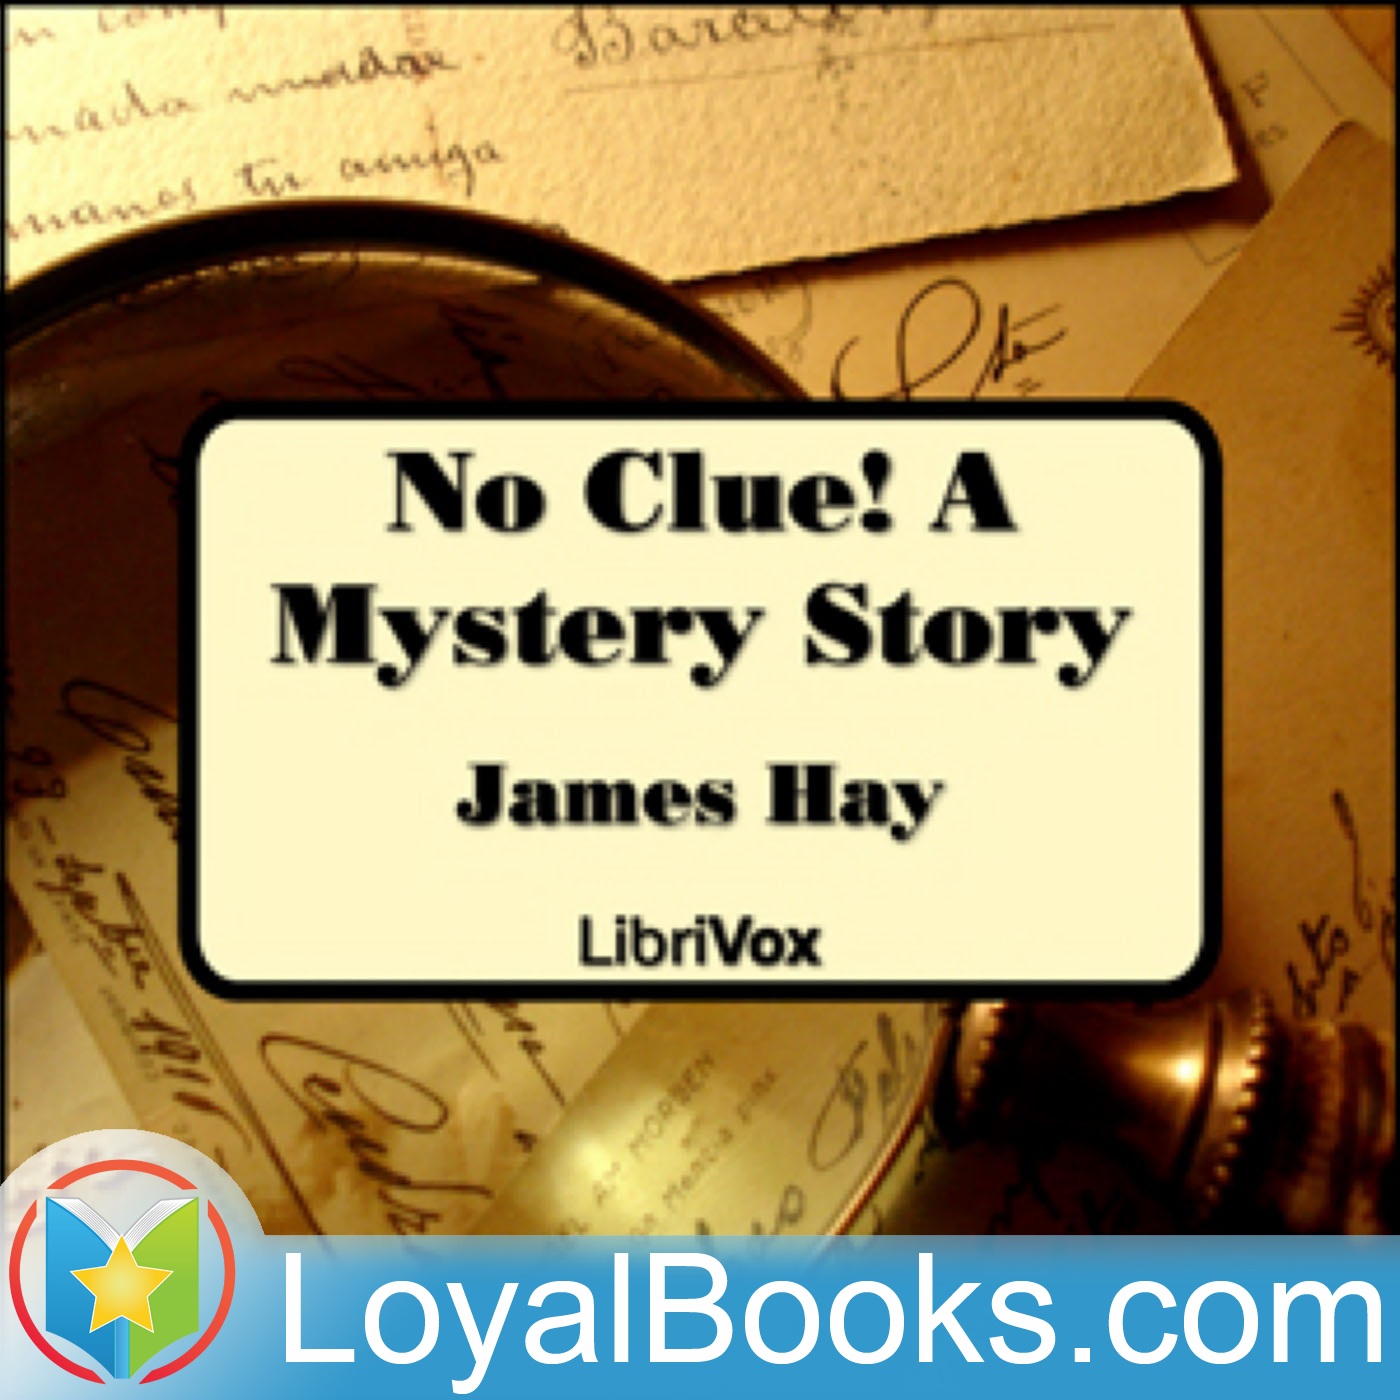 No Clue!  A Mystery Story by James Hay